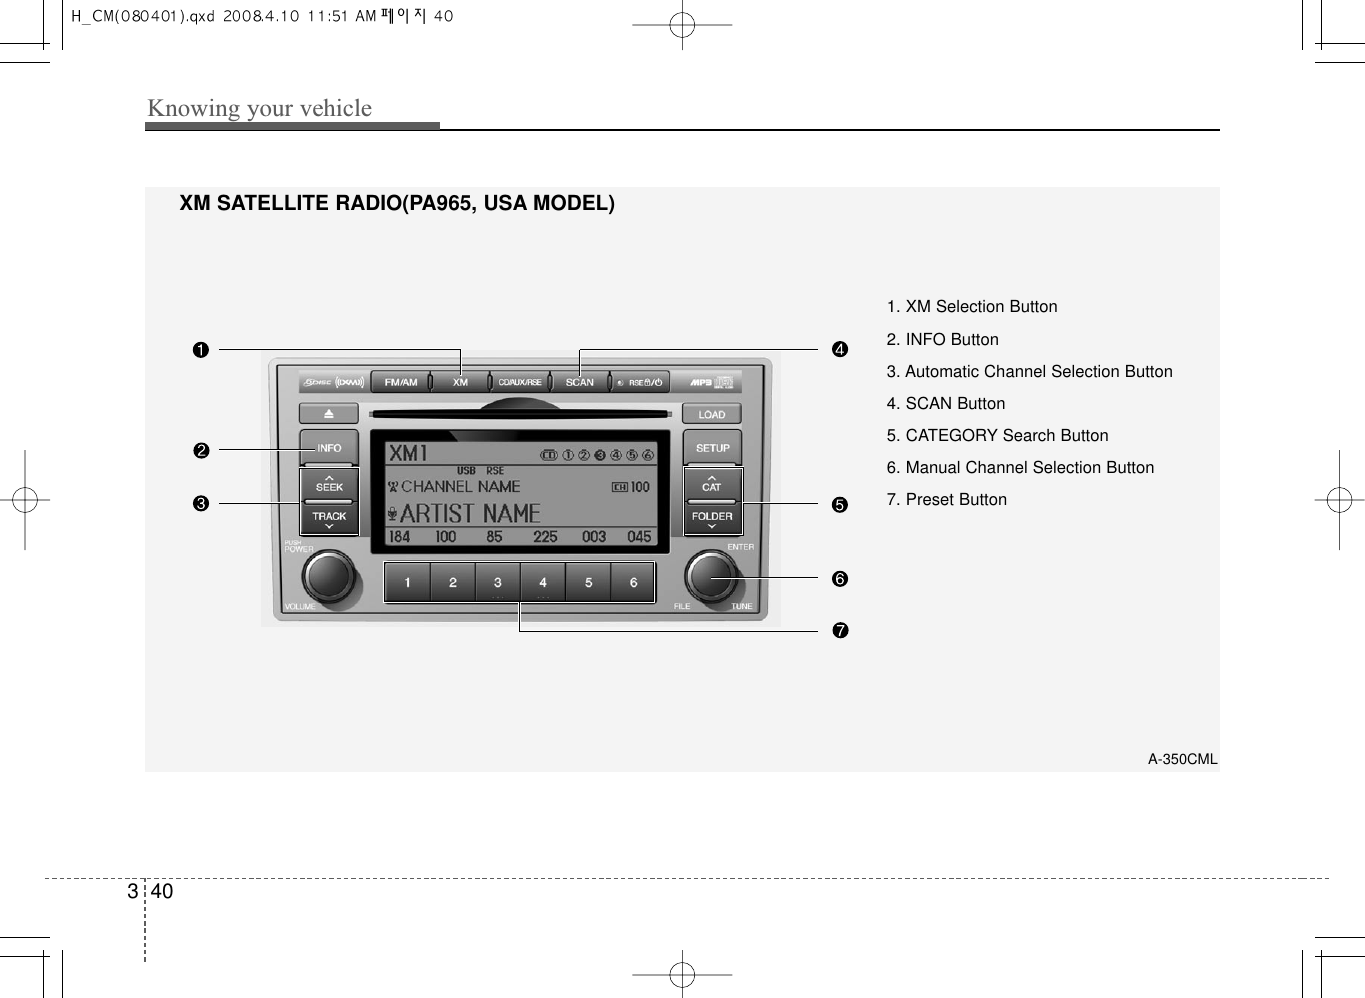 Knowing your vehicle403XM SATELLITE RADIO(PA965, USA MODEL)A-350CML1. XM Selection Button2. INFO Button3. Automatic Channel Selection Button4. SCAN Button5. CATEGORY Search Button6. Manual Channel Selection Button7. Preset Button